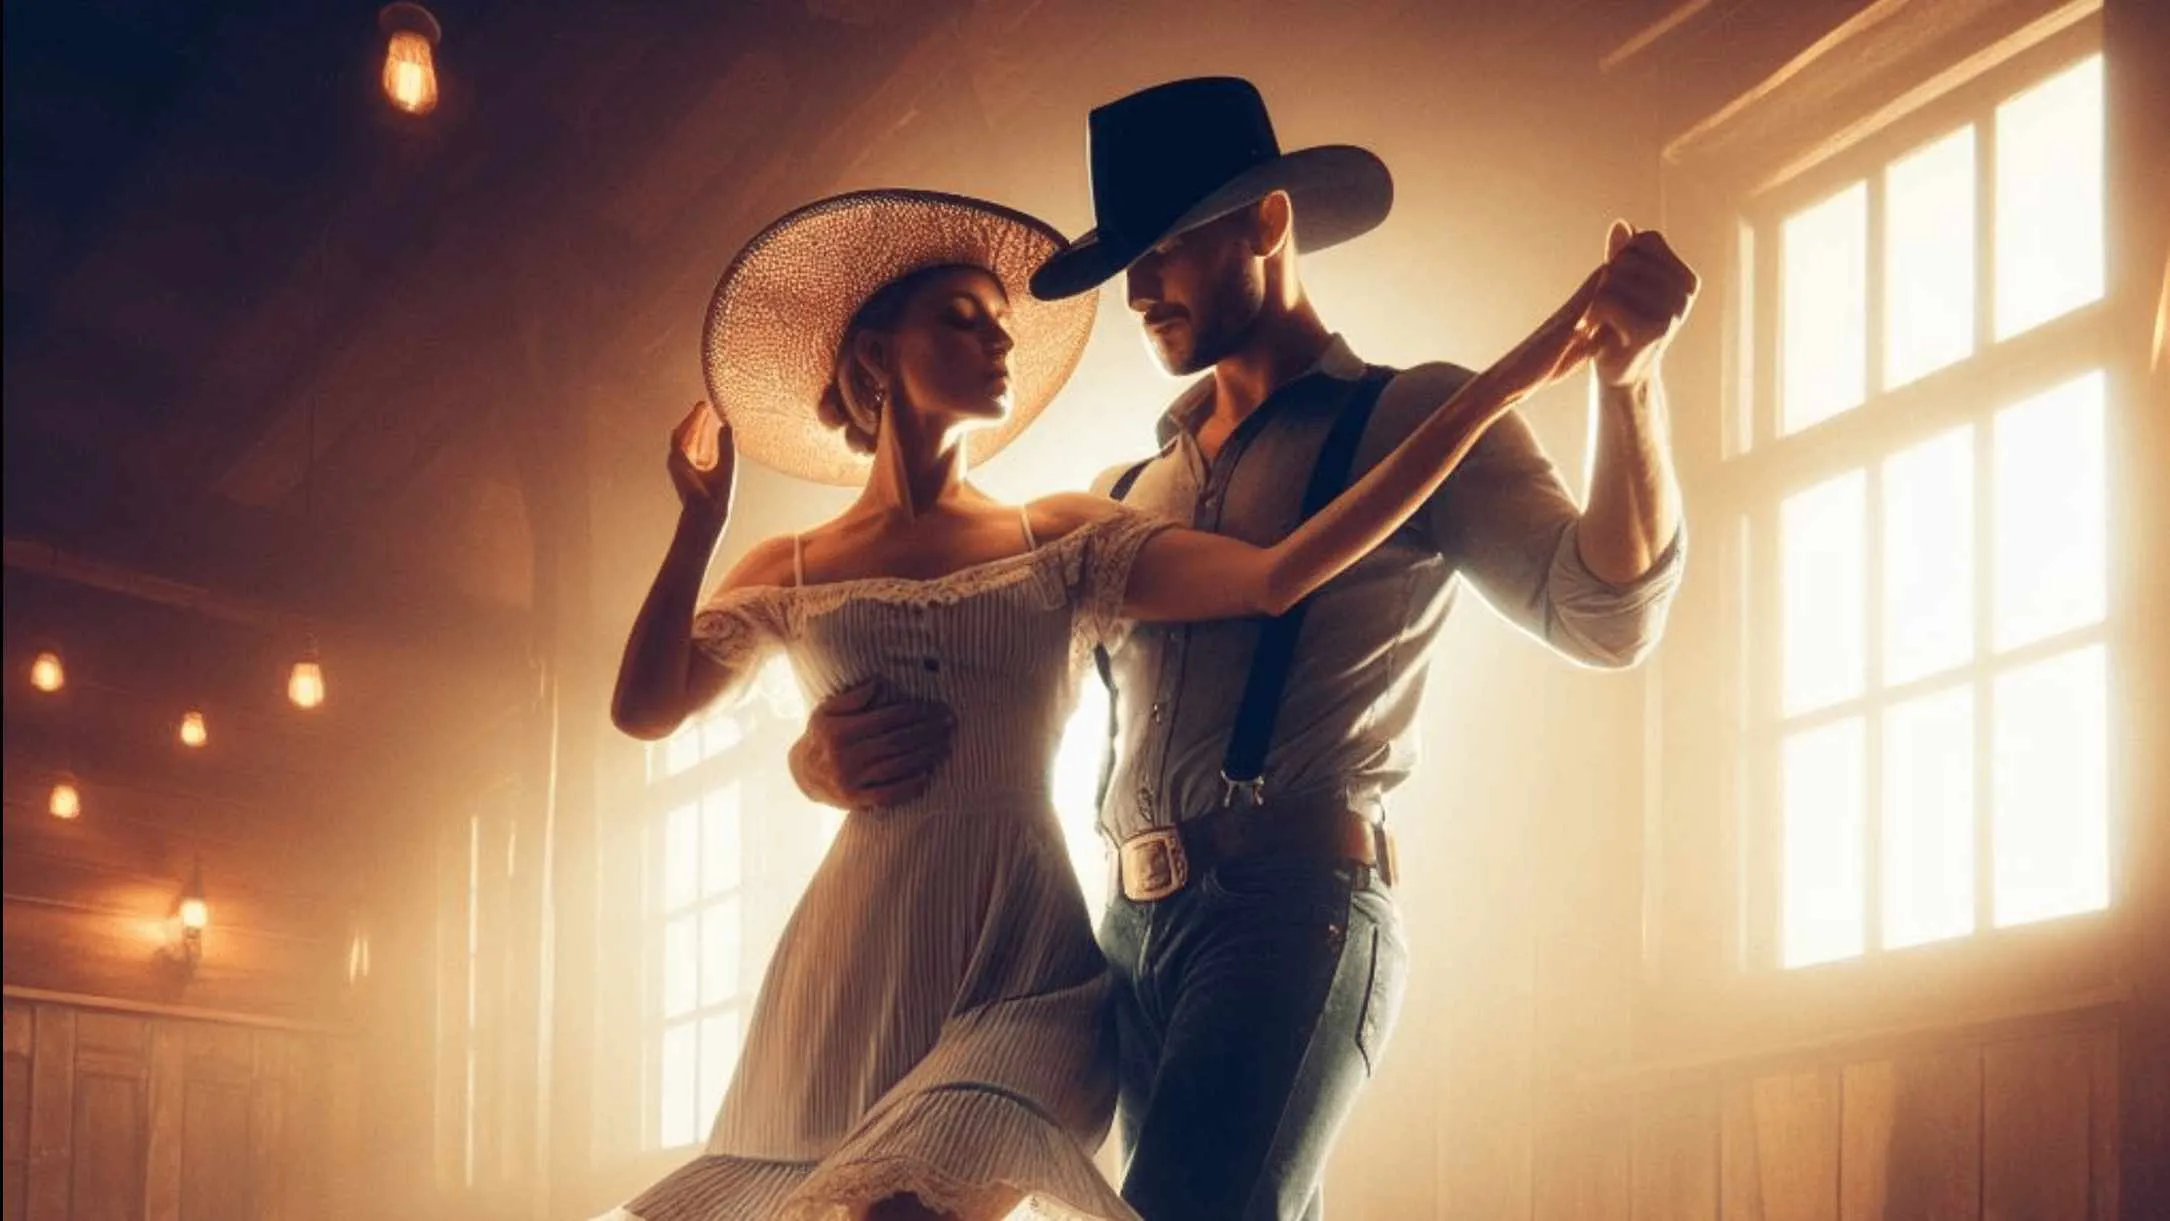 Couple doing country 2-step image